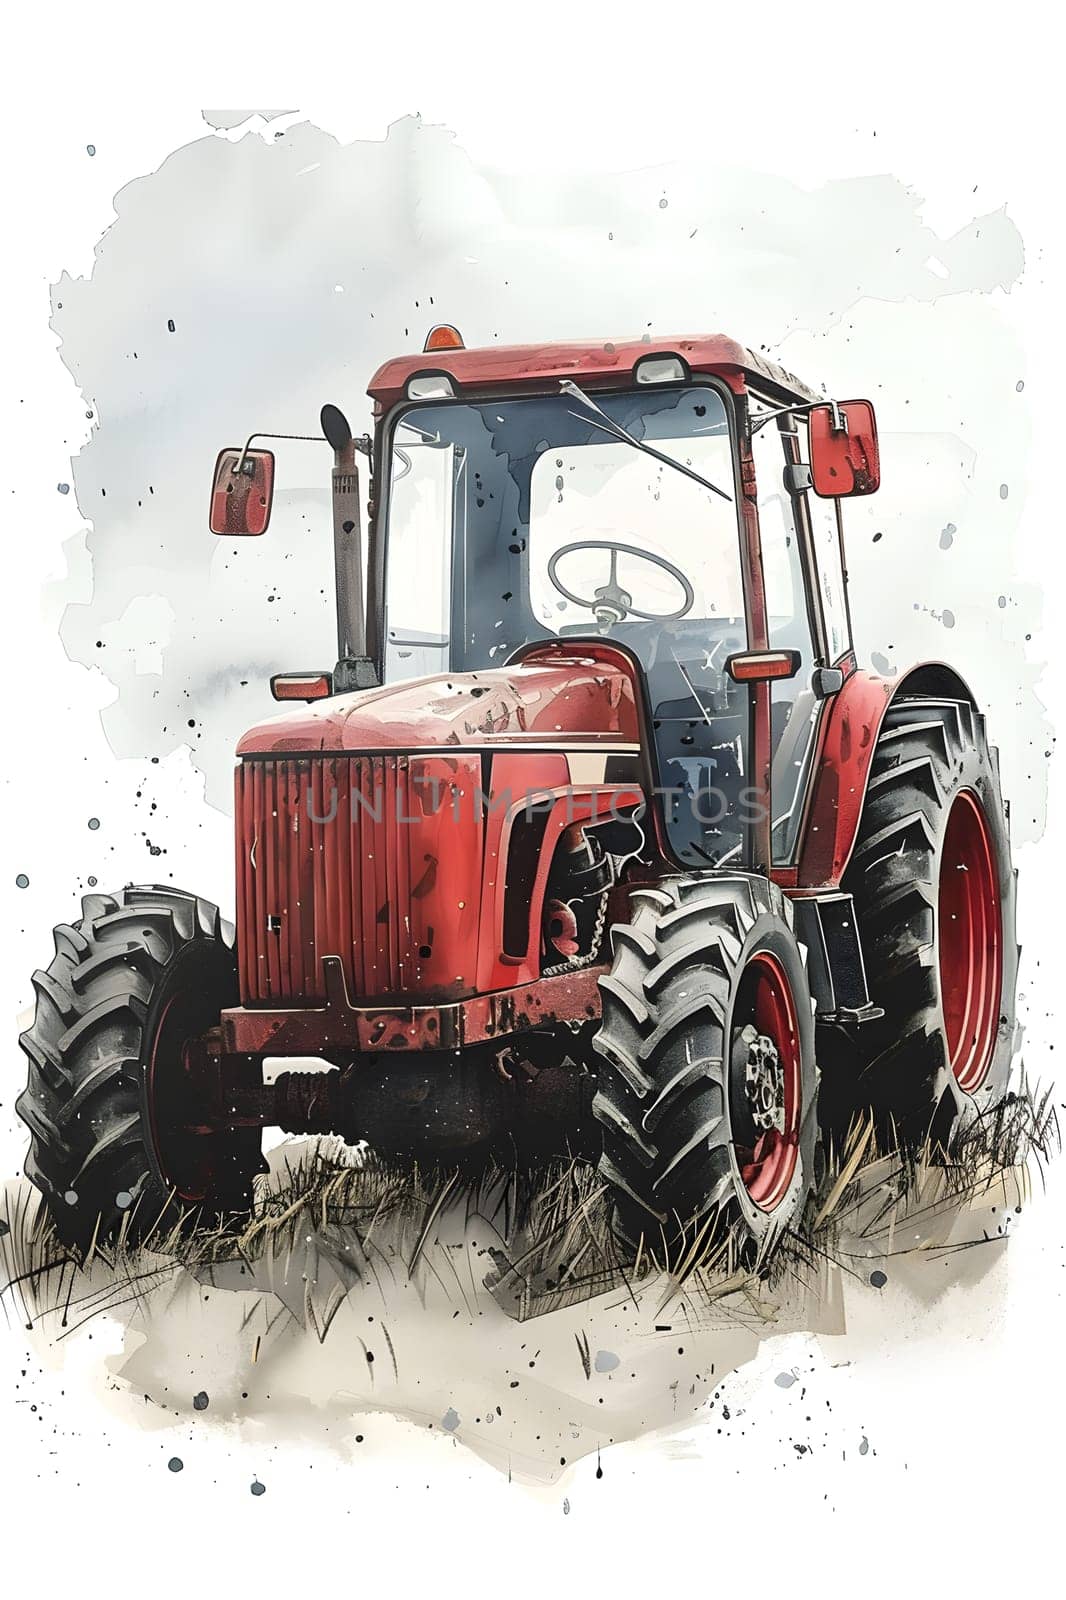 Red tractor with mudcovered wheels navigating through watercolor painting by Nadtochiy